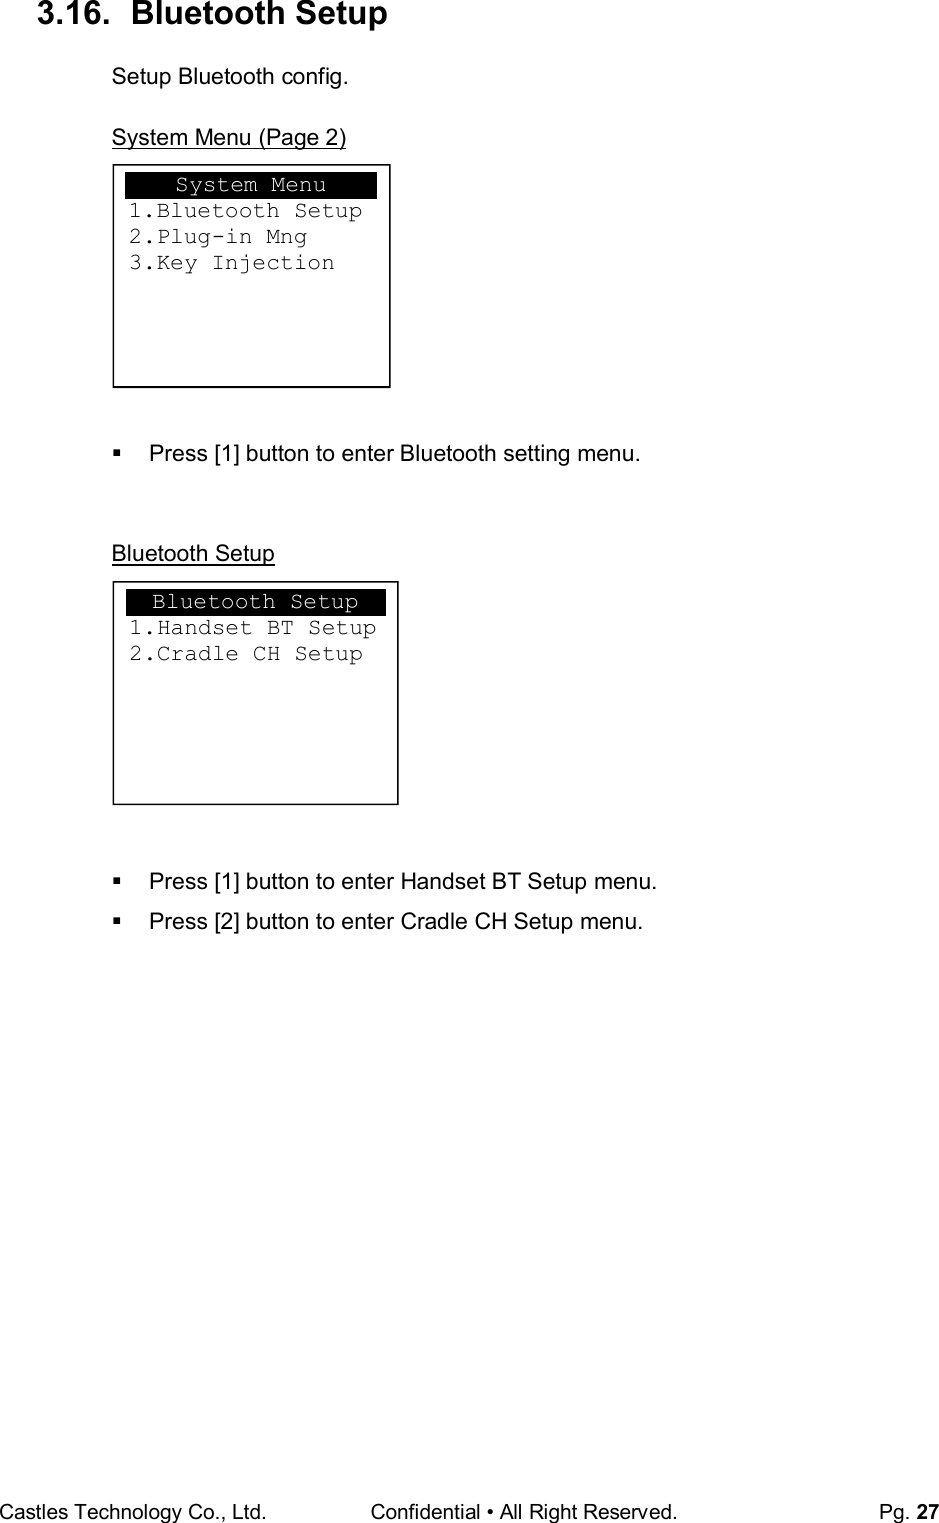 Castles Technology Co., Ltd. Confidential • All Right Reserved.  Pg. 27 3.16.   Bluetooth Setup Setup Bluetooth config.  System Menu (Page 2)          Press [1] button to enter Bluetooth setting menu.   Bluetooth Setup           Press [1] button to enter Handset BT Setup menu.   Press [2] button to enter Cradle CH Setup menu.      System Menu 1.Bluetooth Setup 2.Plug-in Mng 3.Key Injection  Bluetooth Setup 1.Handset BT Setup 2.Cradle CH Setup  